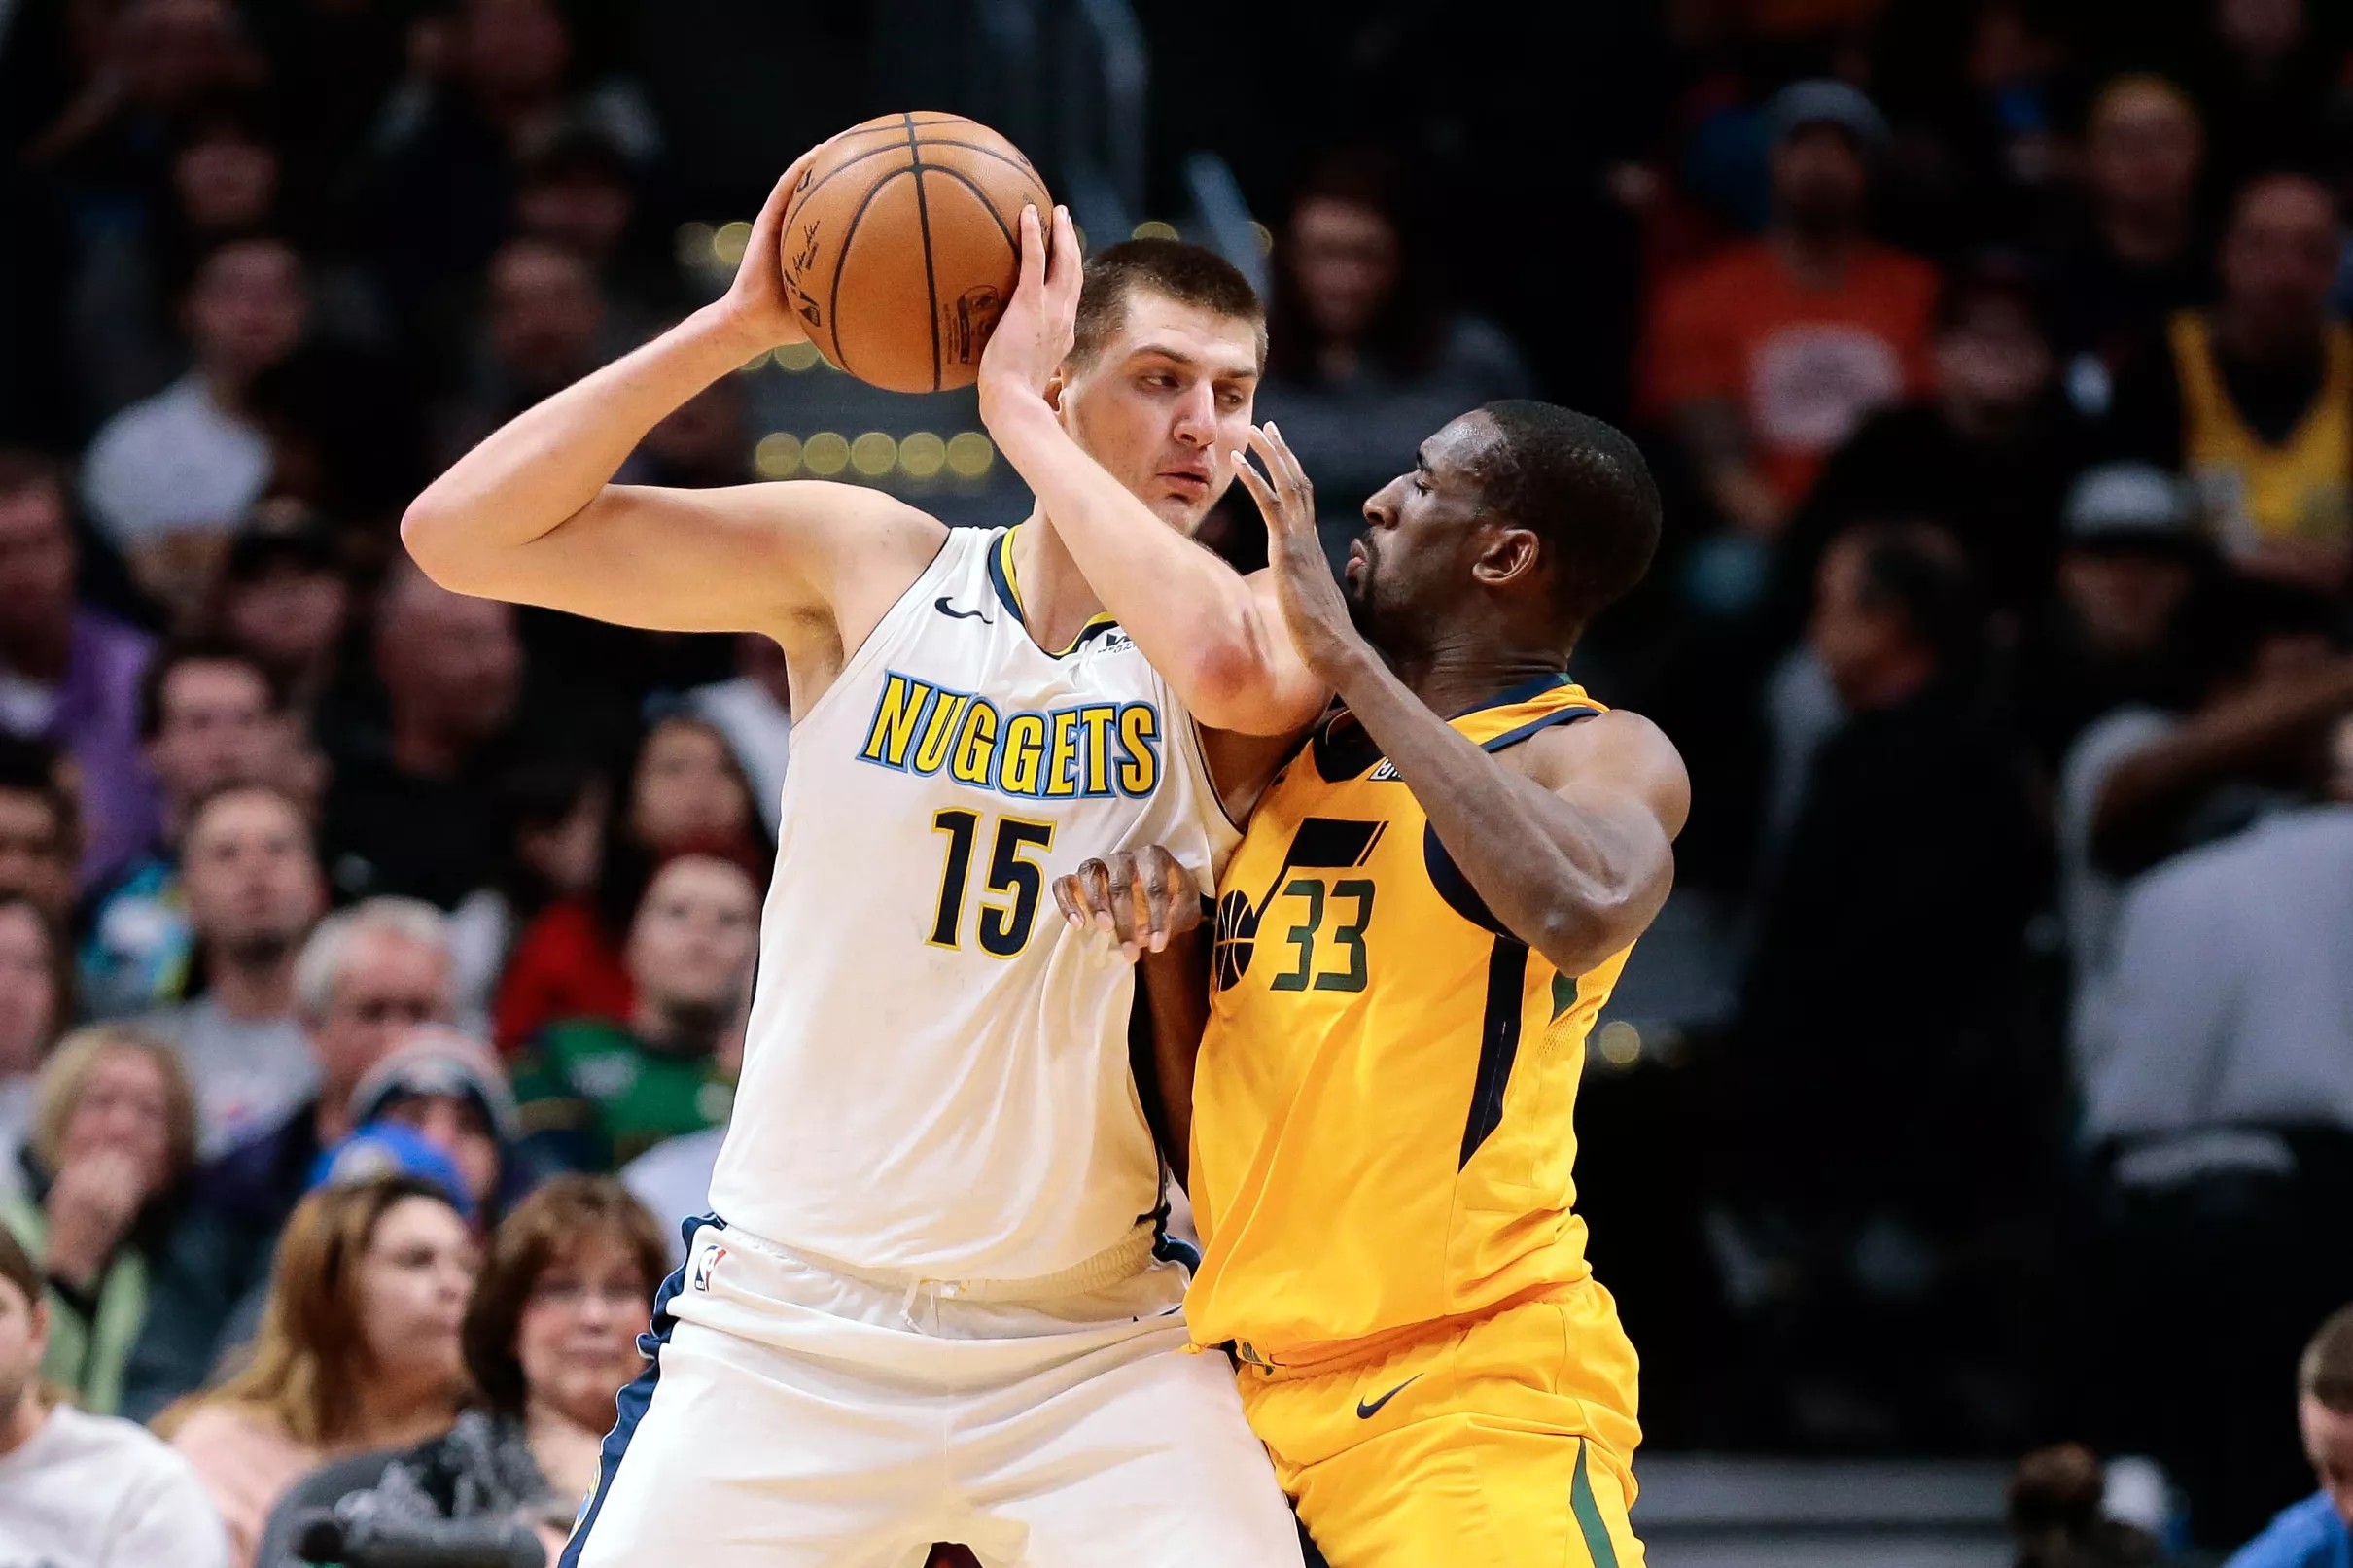 jazz vs nuggets tv channel